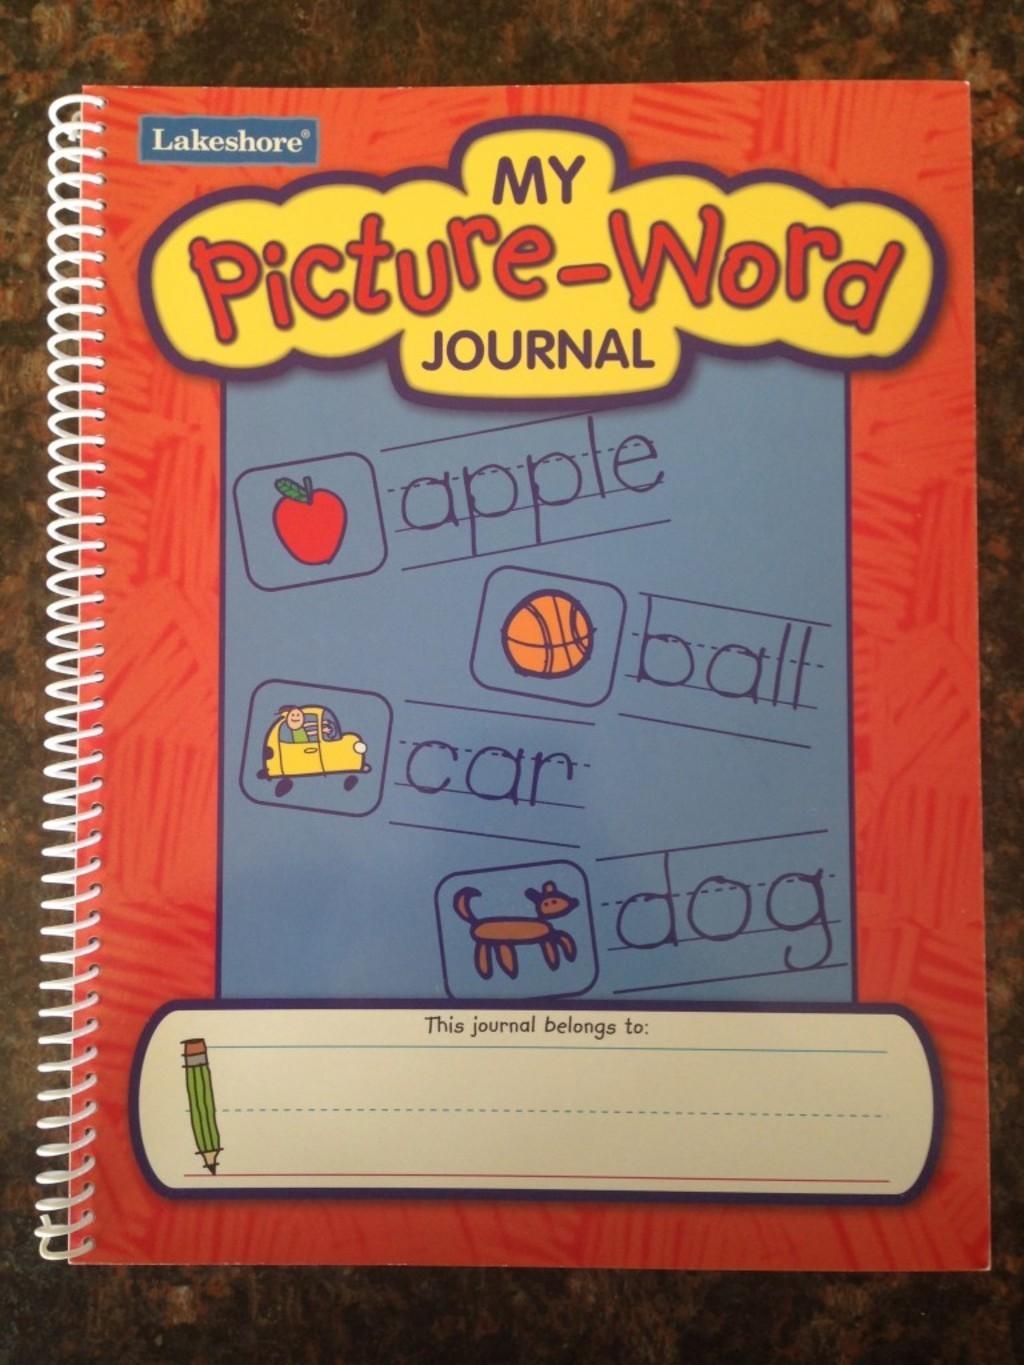 My Picture-Word Journal